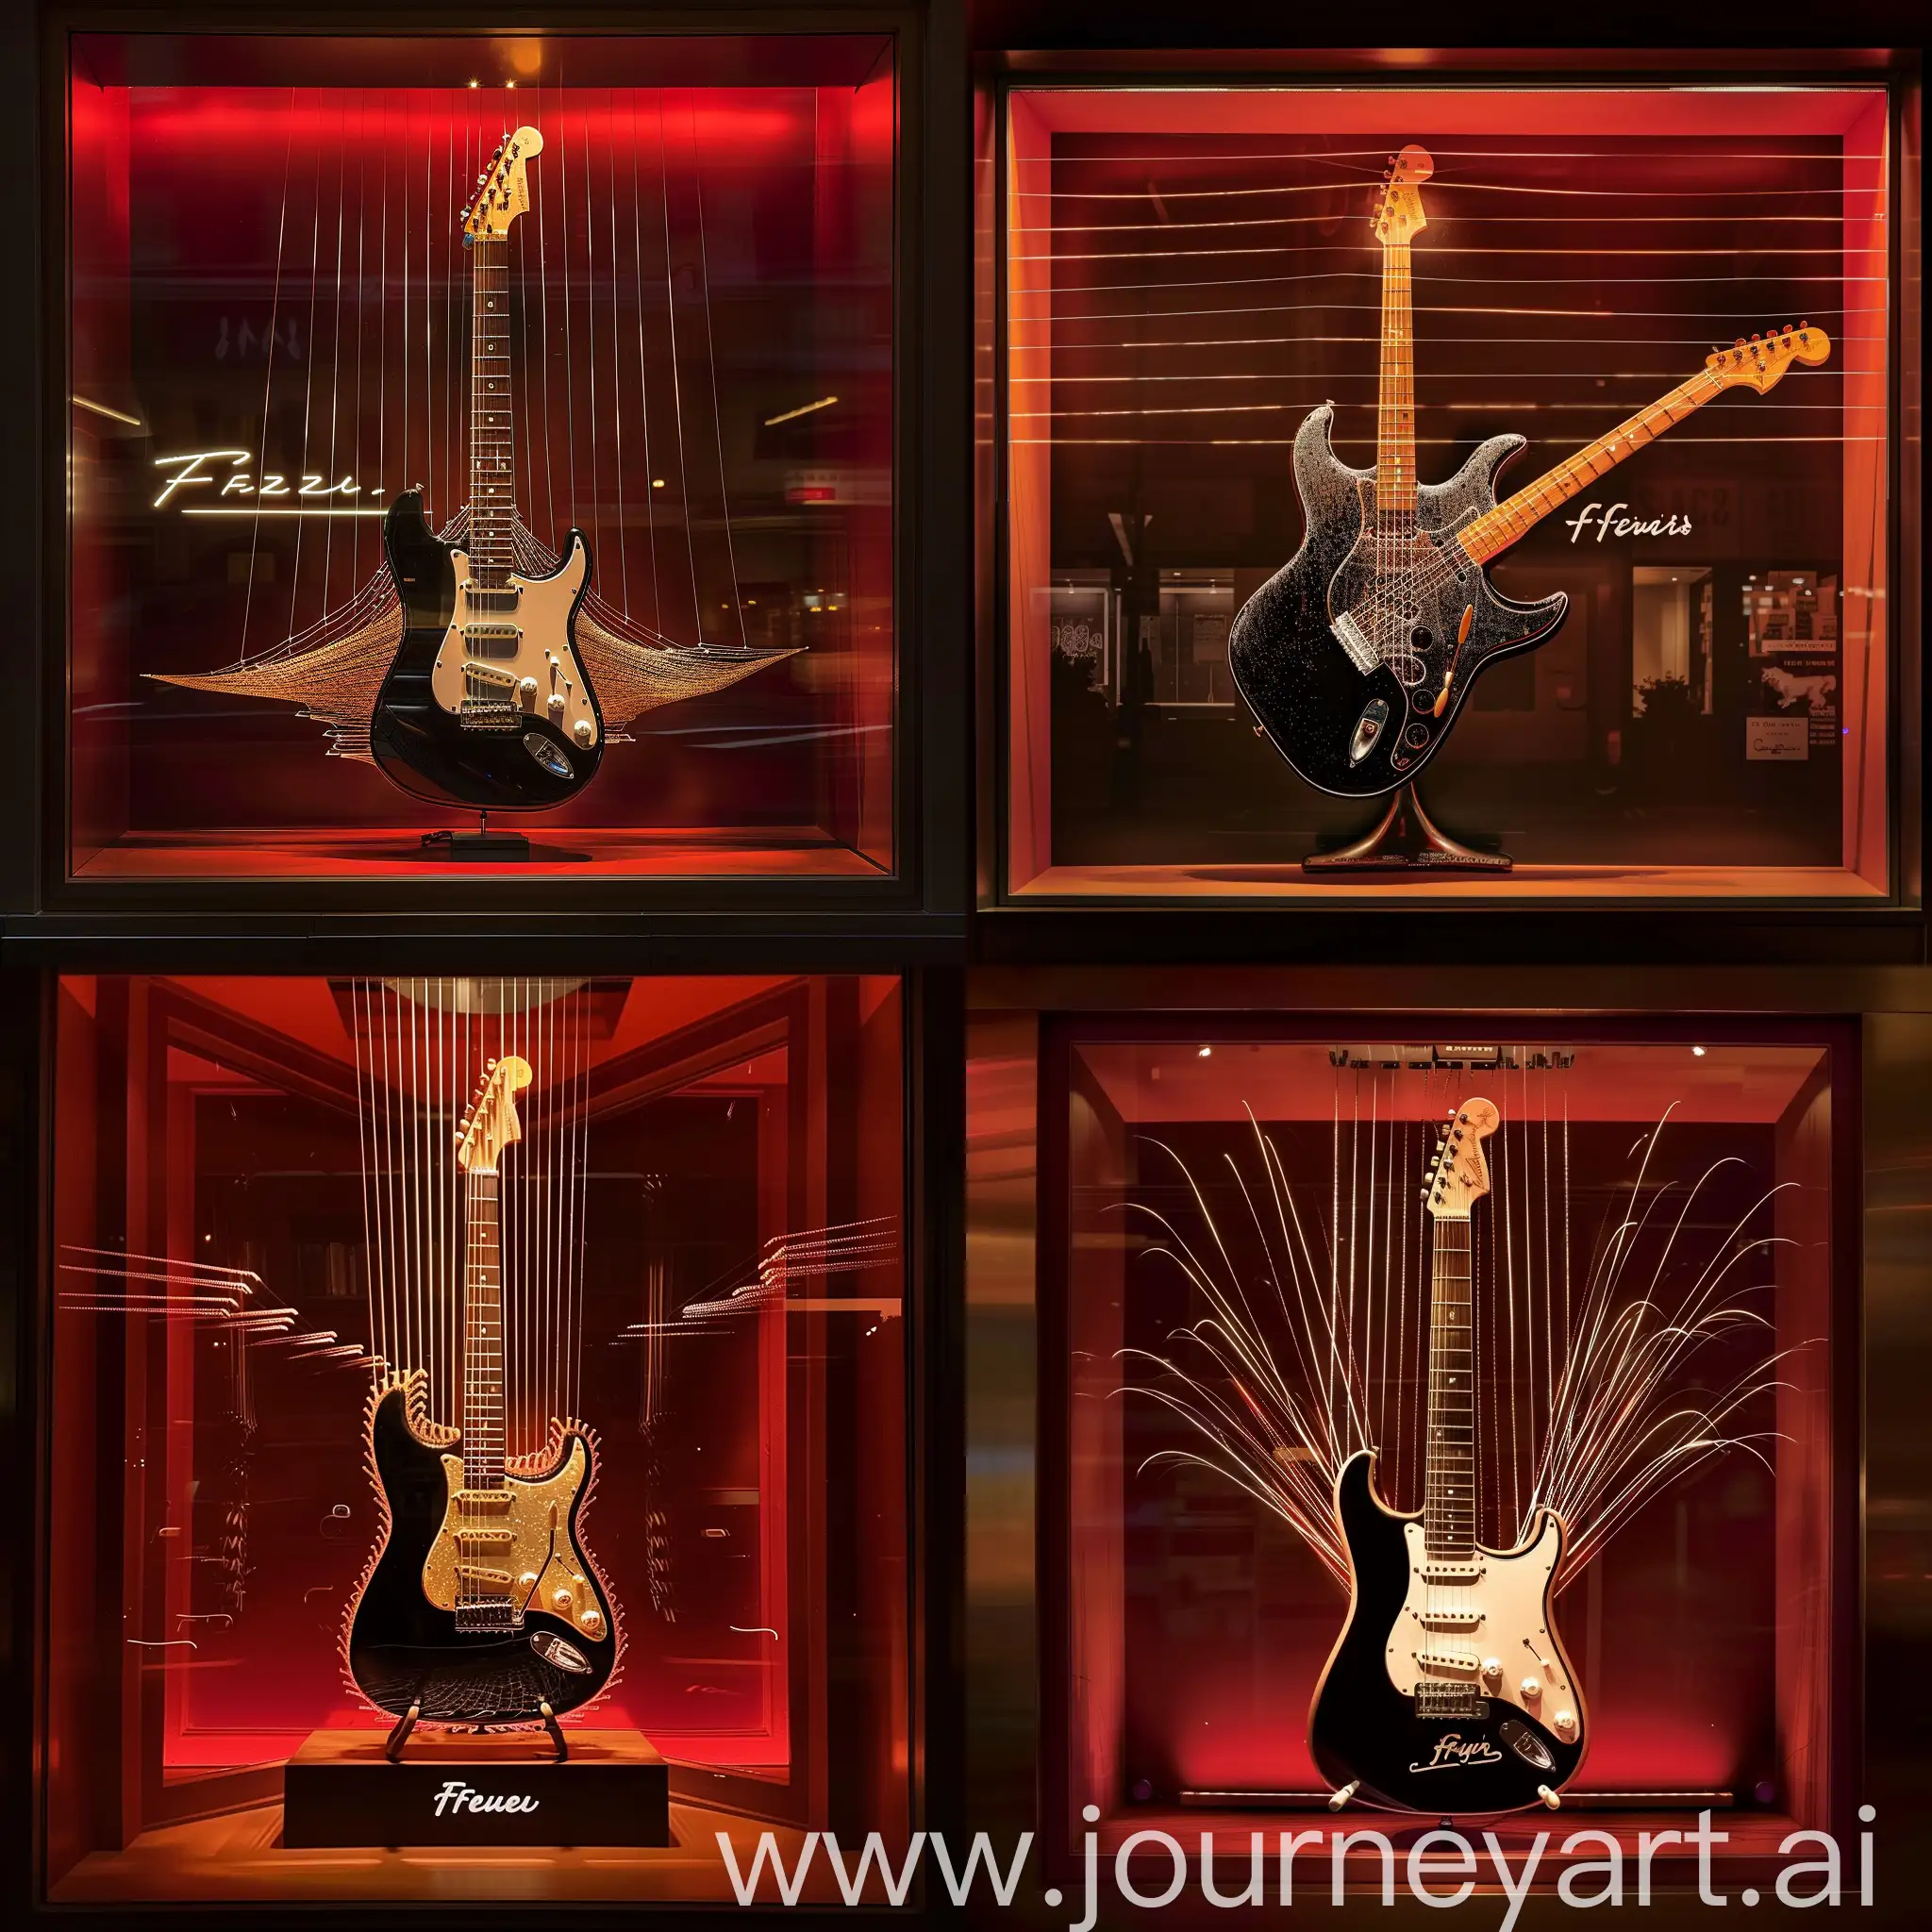 A Fender Guitars shop window  with a single black and white electric guitar on its own stand, the strings of the guitar seem to extend from the tuning keys  all the way to the ceiling of the window  as if it has no end and resembles a musical amphitheater. The background is dark red with warm lighting .